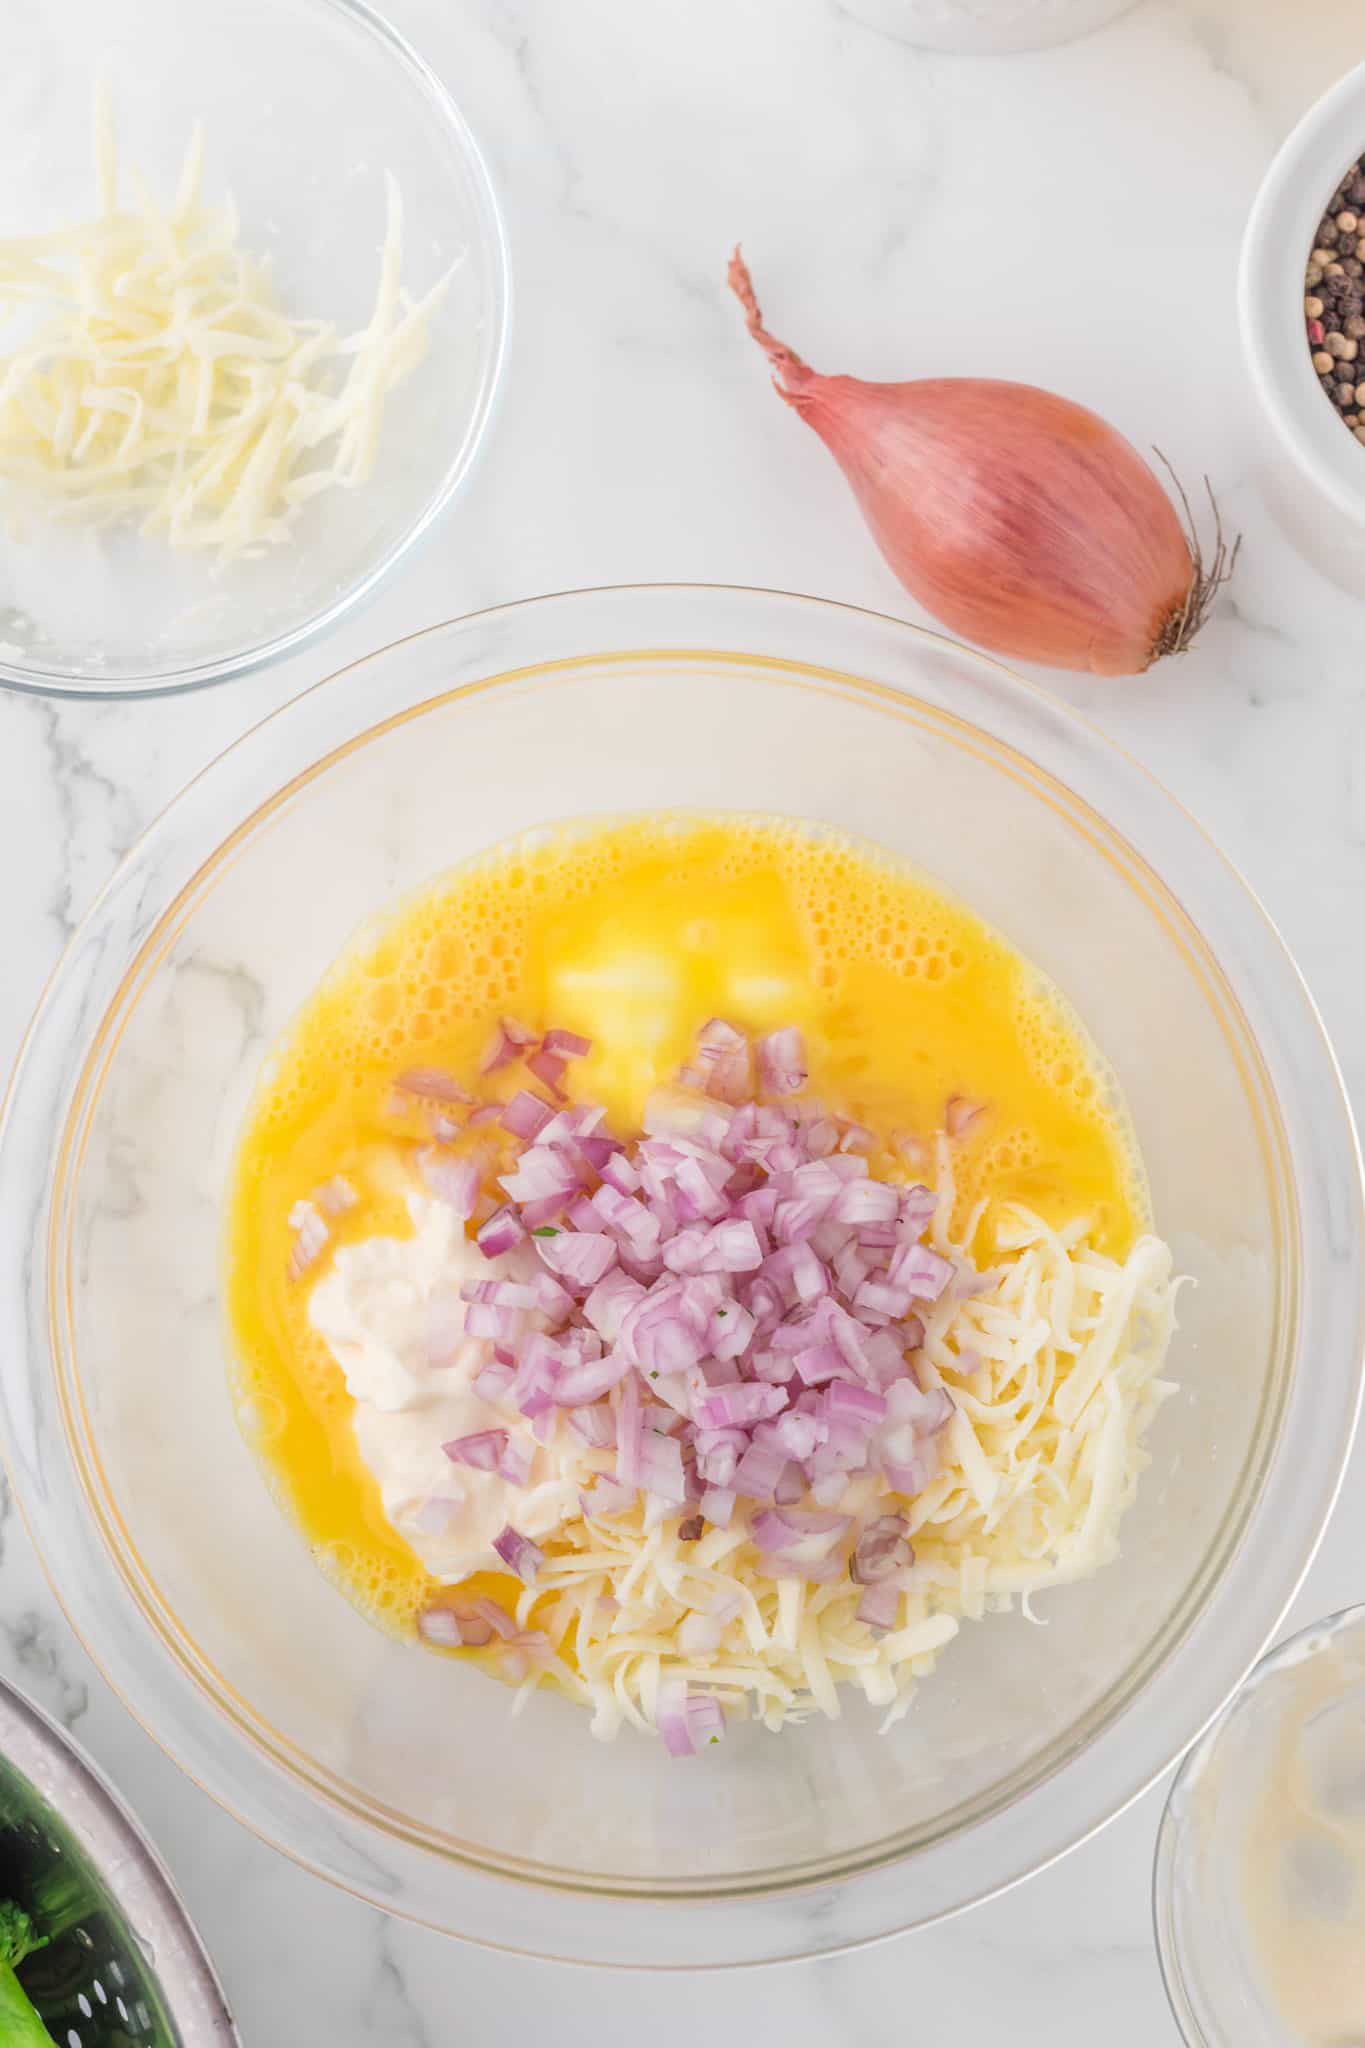 shallots, grated cheese, eggs sour cream and mayo in a mixing bowl